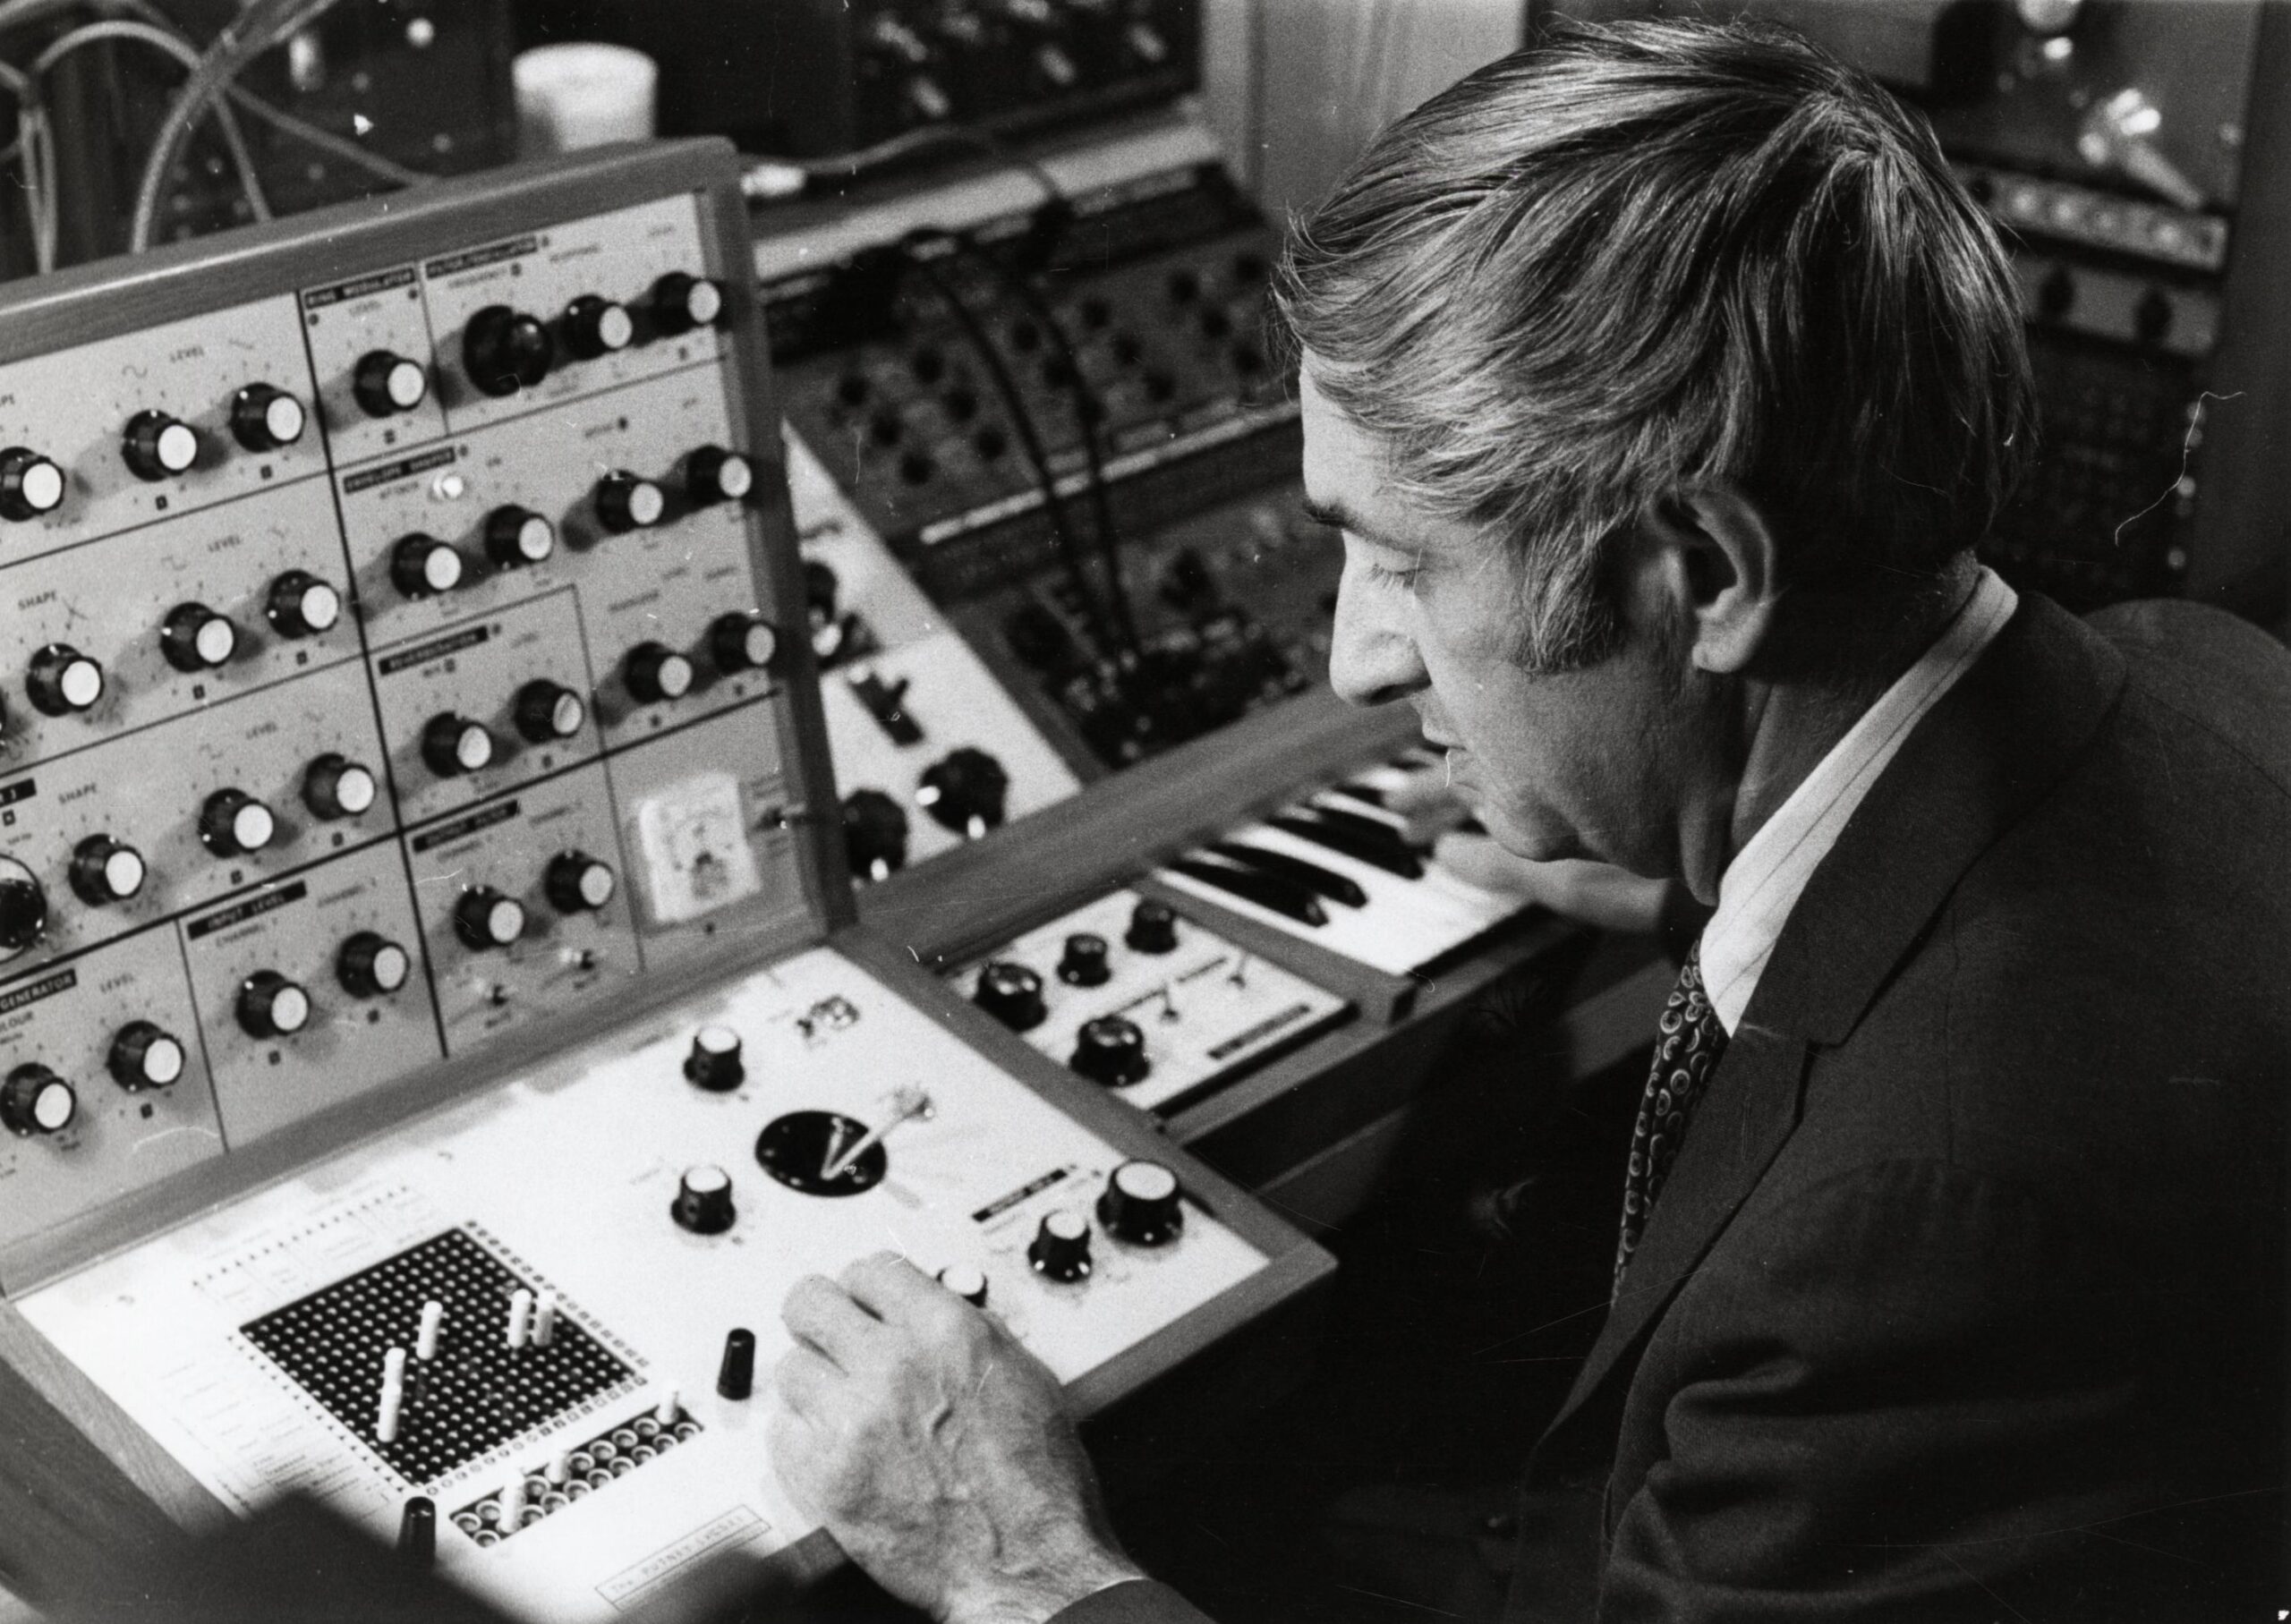 Composer Don Voegeli with his Putney synthesizer.